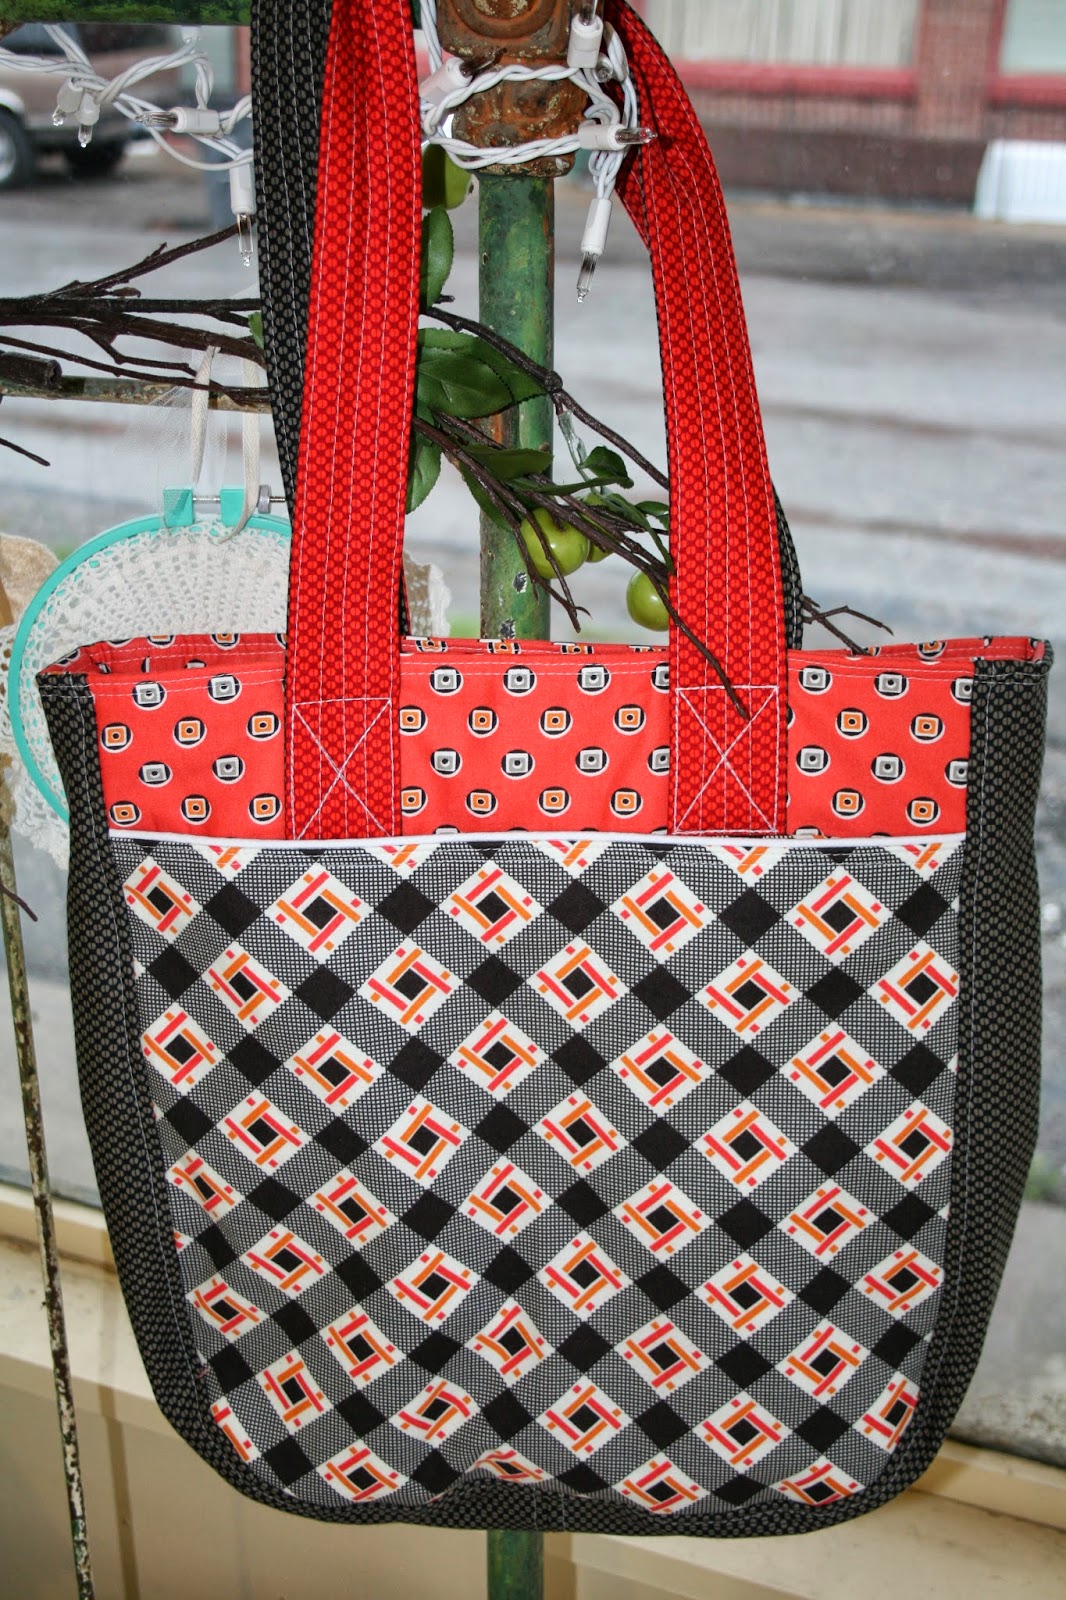 THE QUILT BARN: Florence and a New Supertote